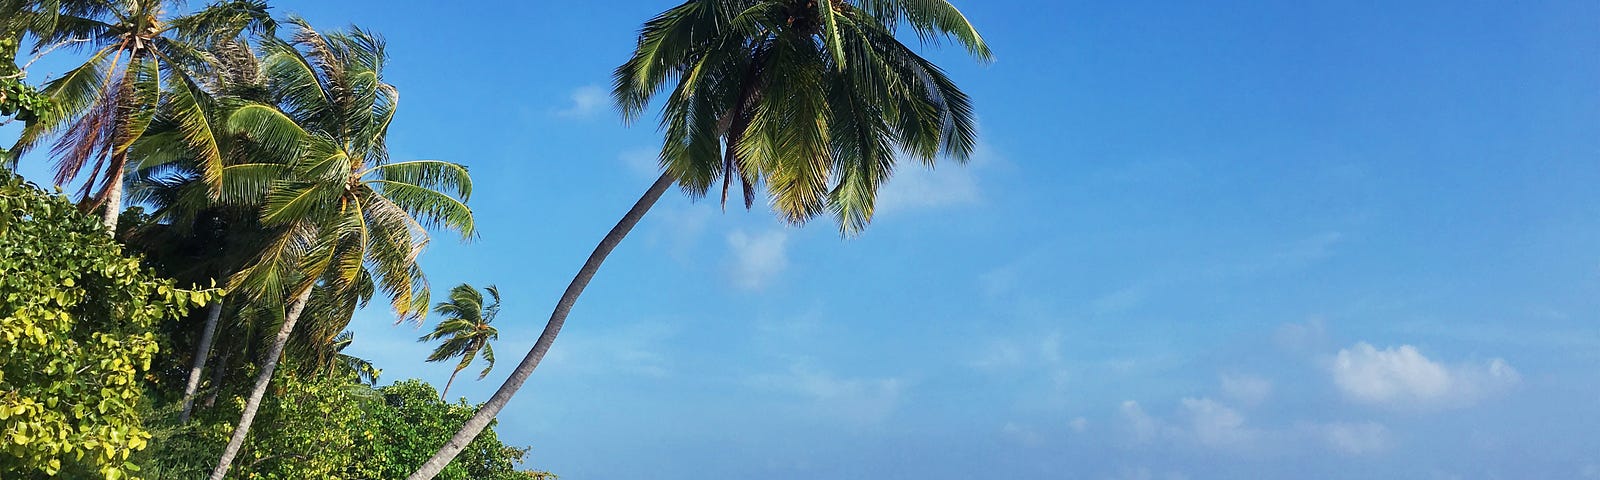 Image of a white beach on the left half of the image, with palm trees, and on the right the bright blue ocean.